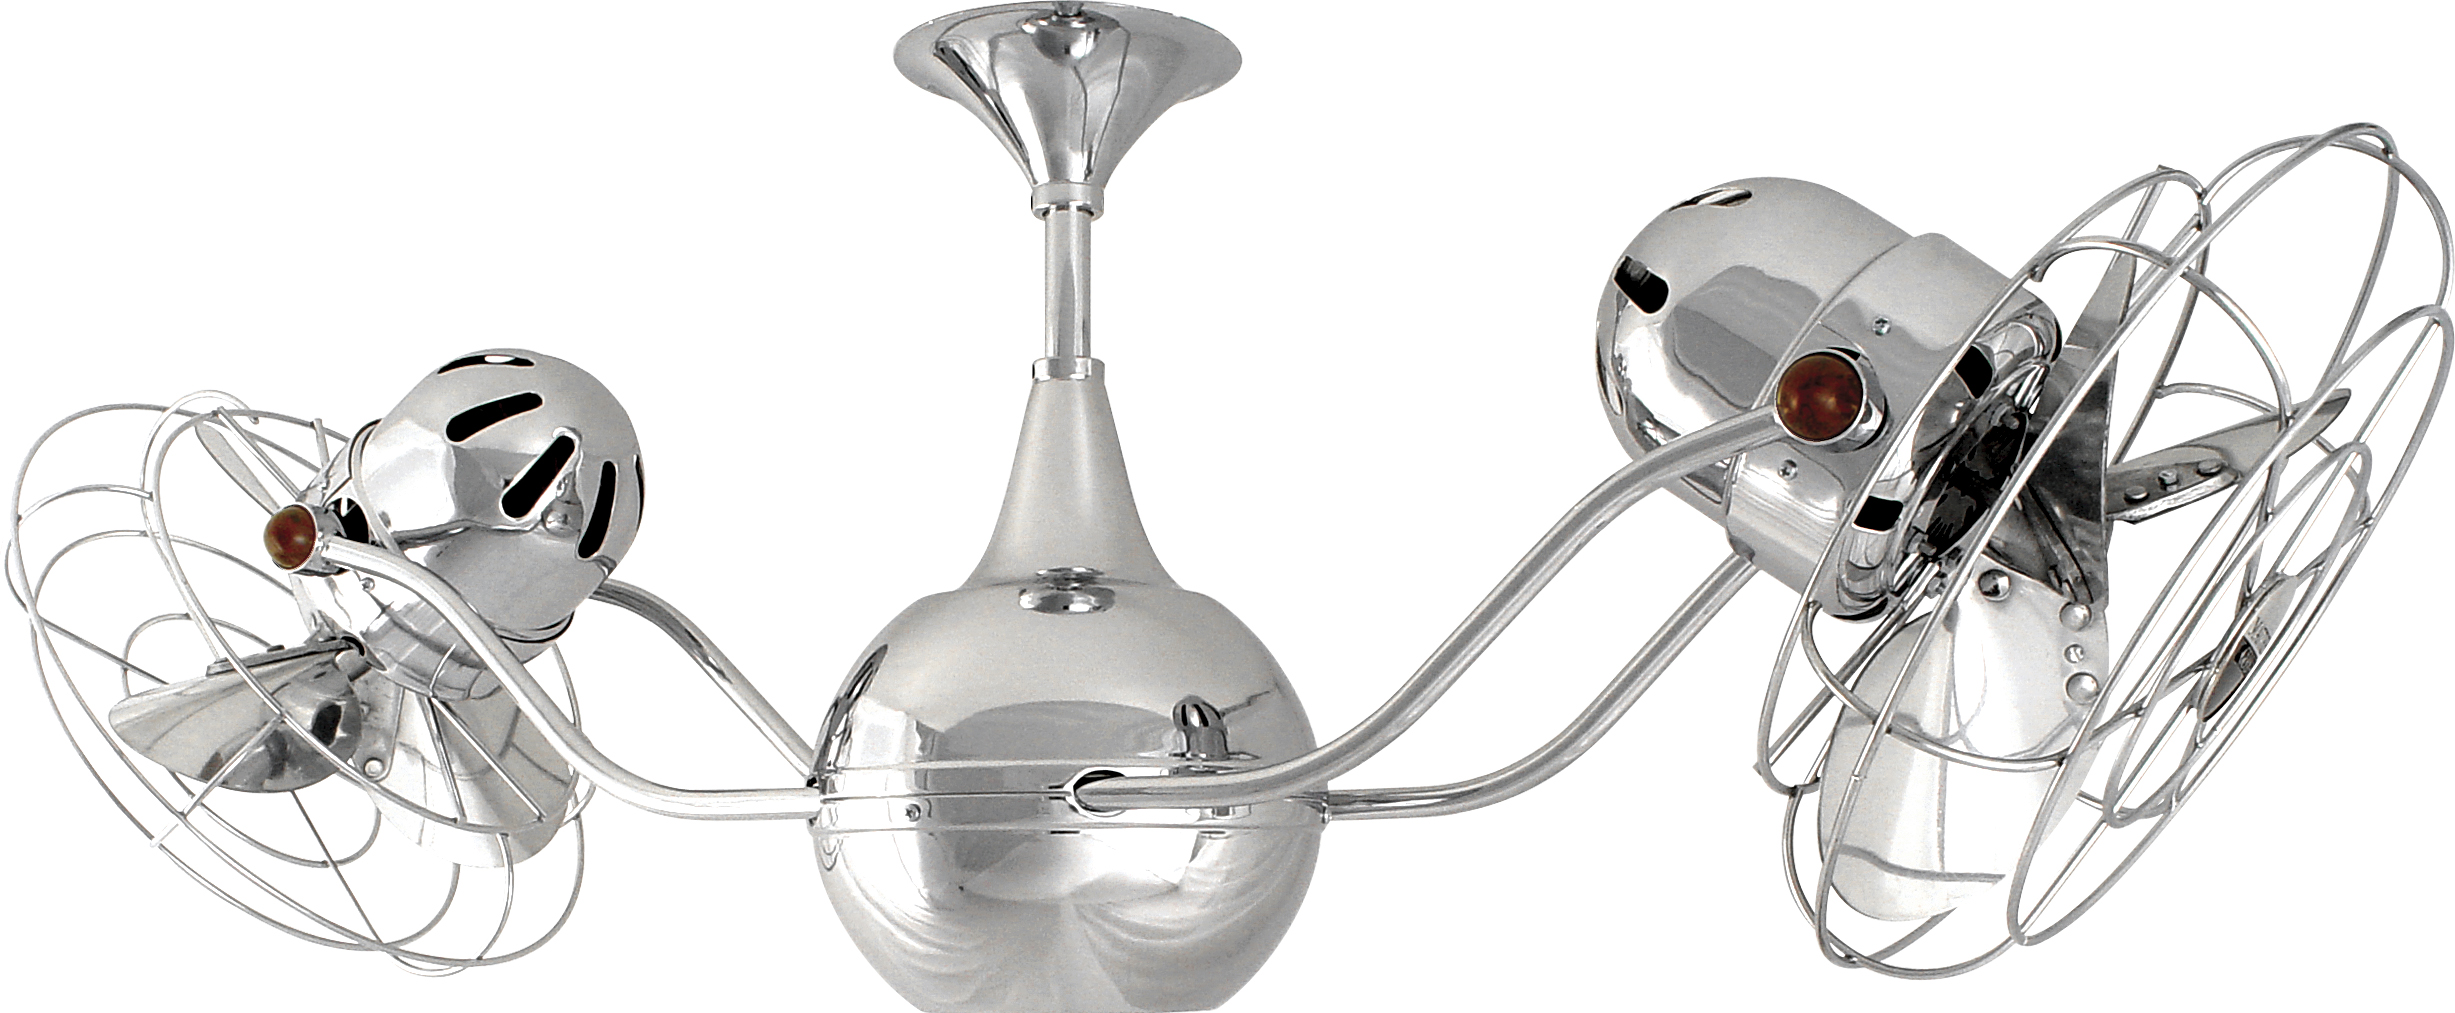 Vent-Bettina rotational dual head ceiling fan in Polished Chrome finish with Metal blades and Decorative Cage made by Matthews Fan Company.